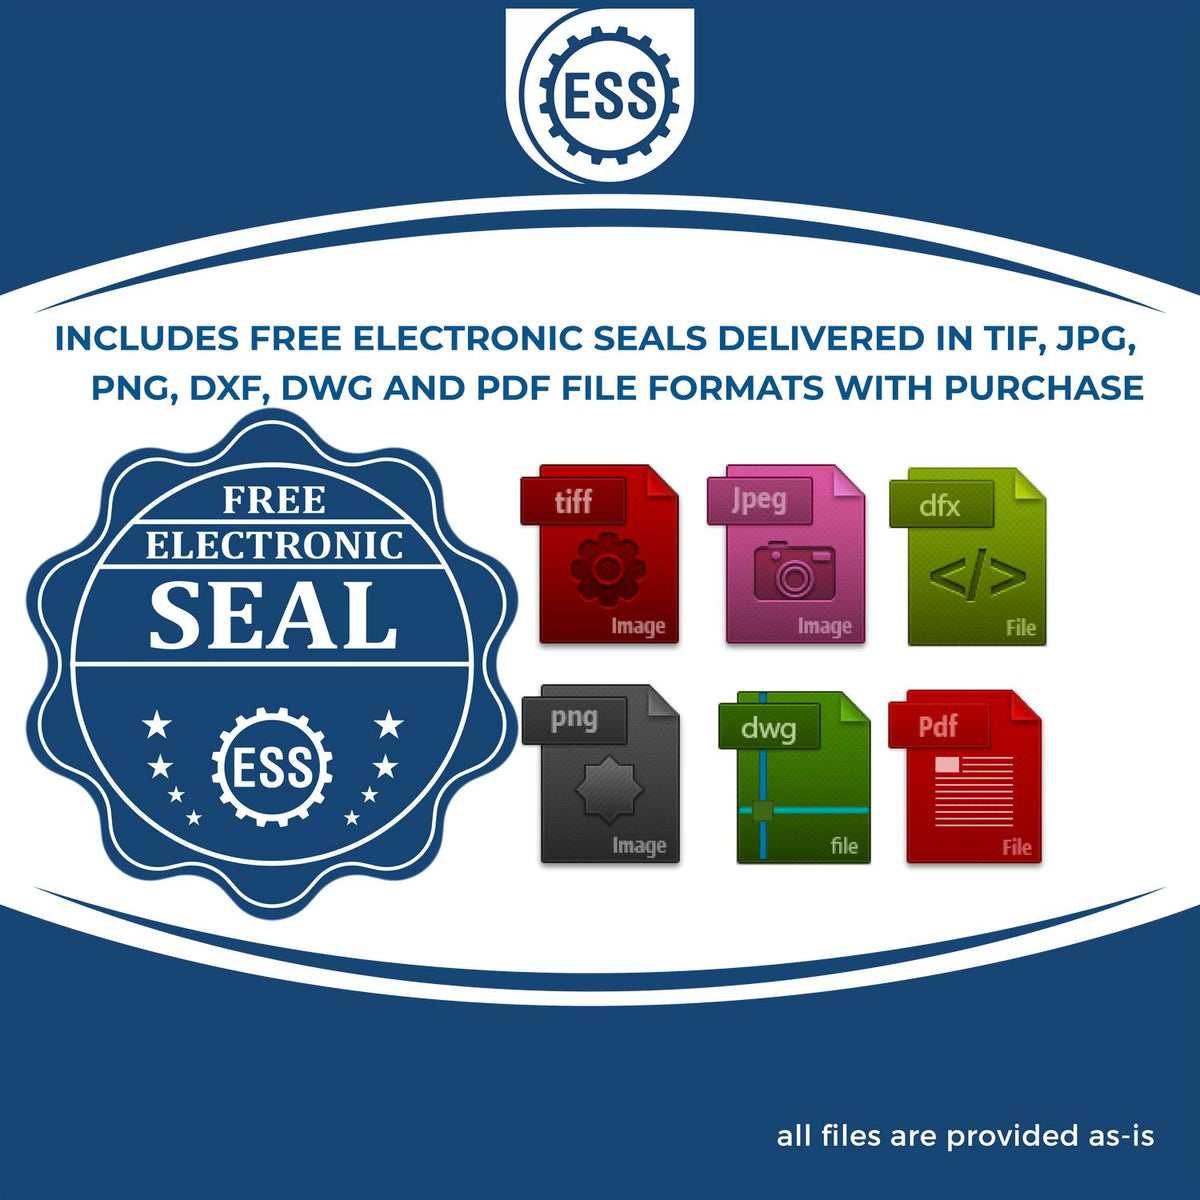 An infographic for the free electronic seal for the Extended Long Reach Kansas Surveyor Embosser illustrating the different file type icons such as DXF, DWG, TIF, JPG and PNG.